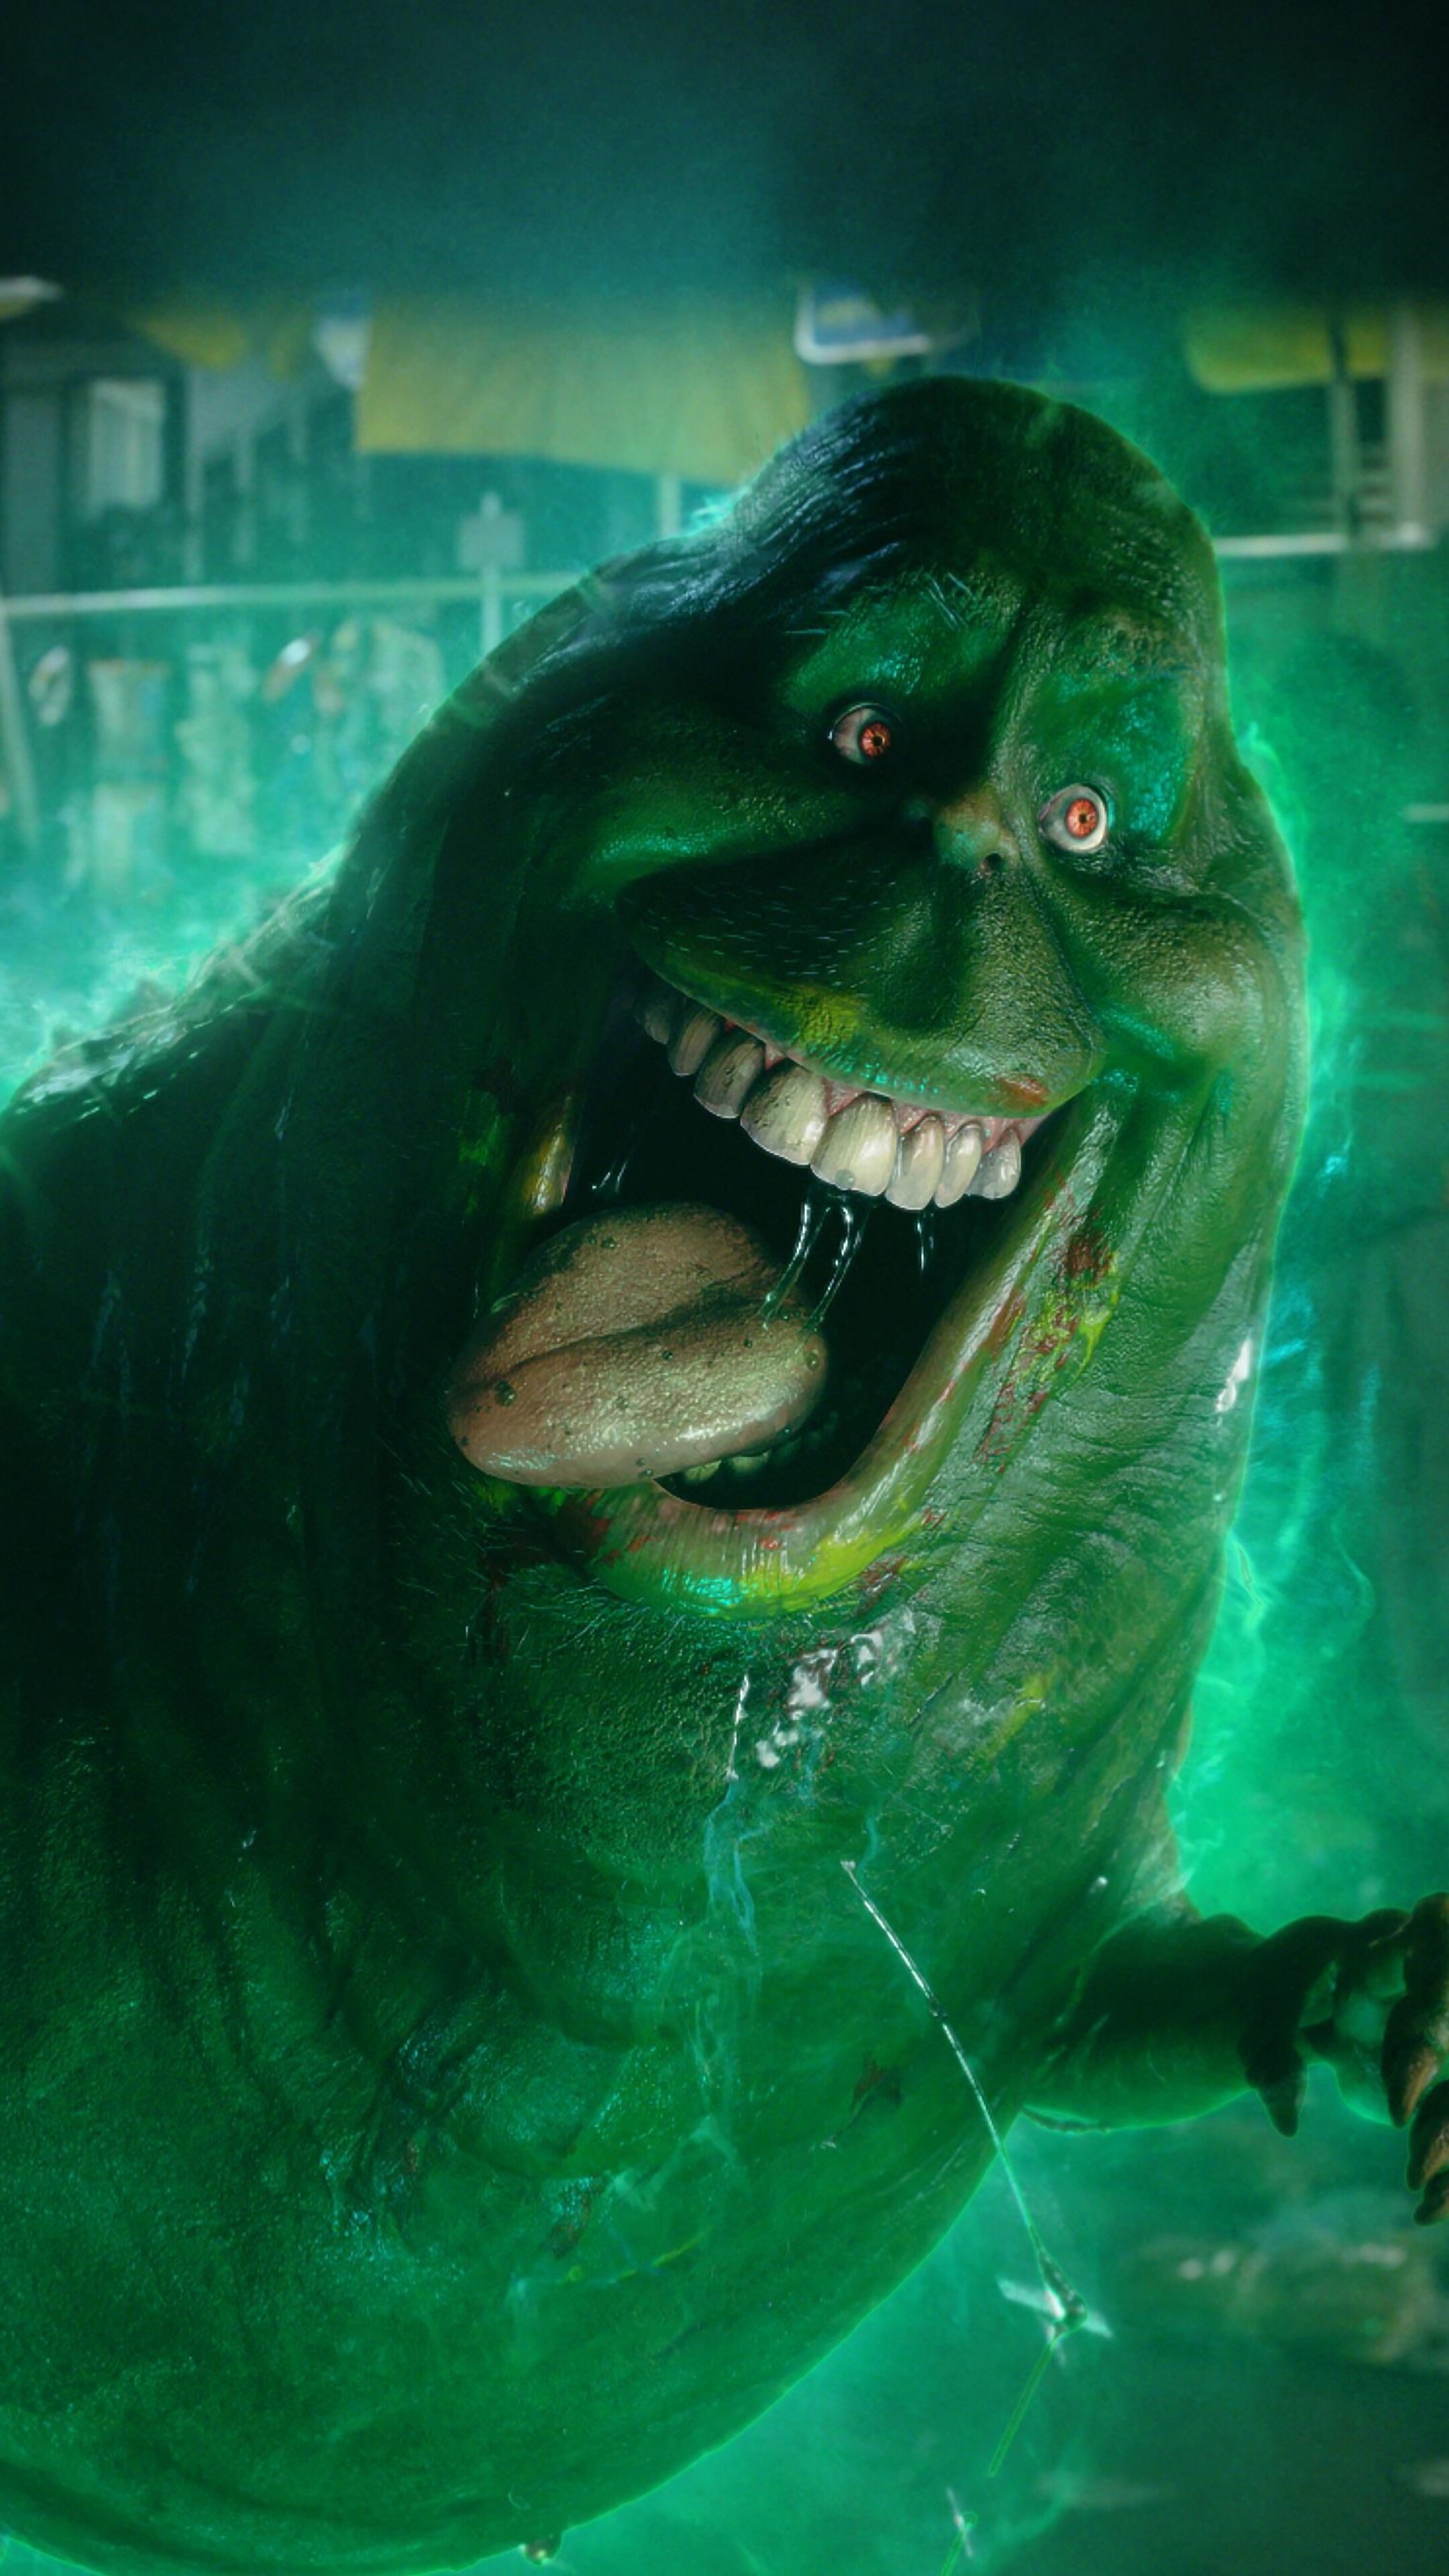 Slimer in Ghostbusters, 5K Sony Xperia X, Z5 Premium, HD 4K wallpapers, Images and backgrounds, 2160x3840 4K Phone